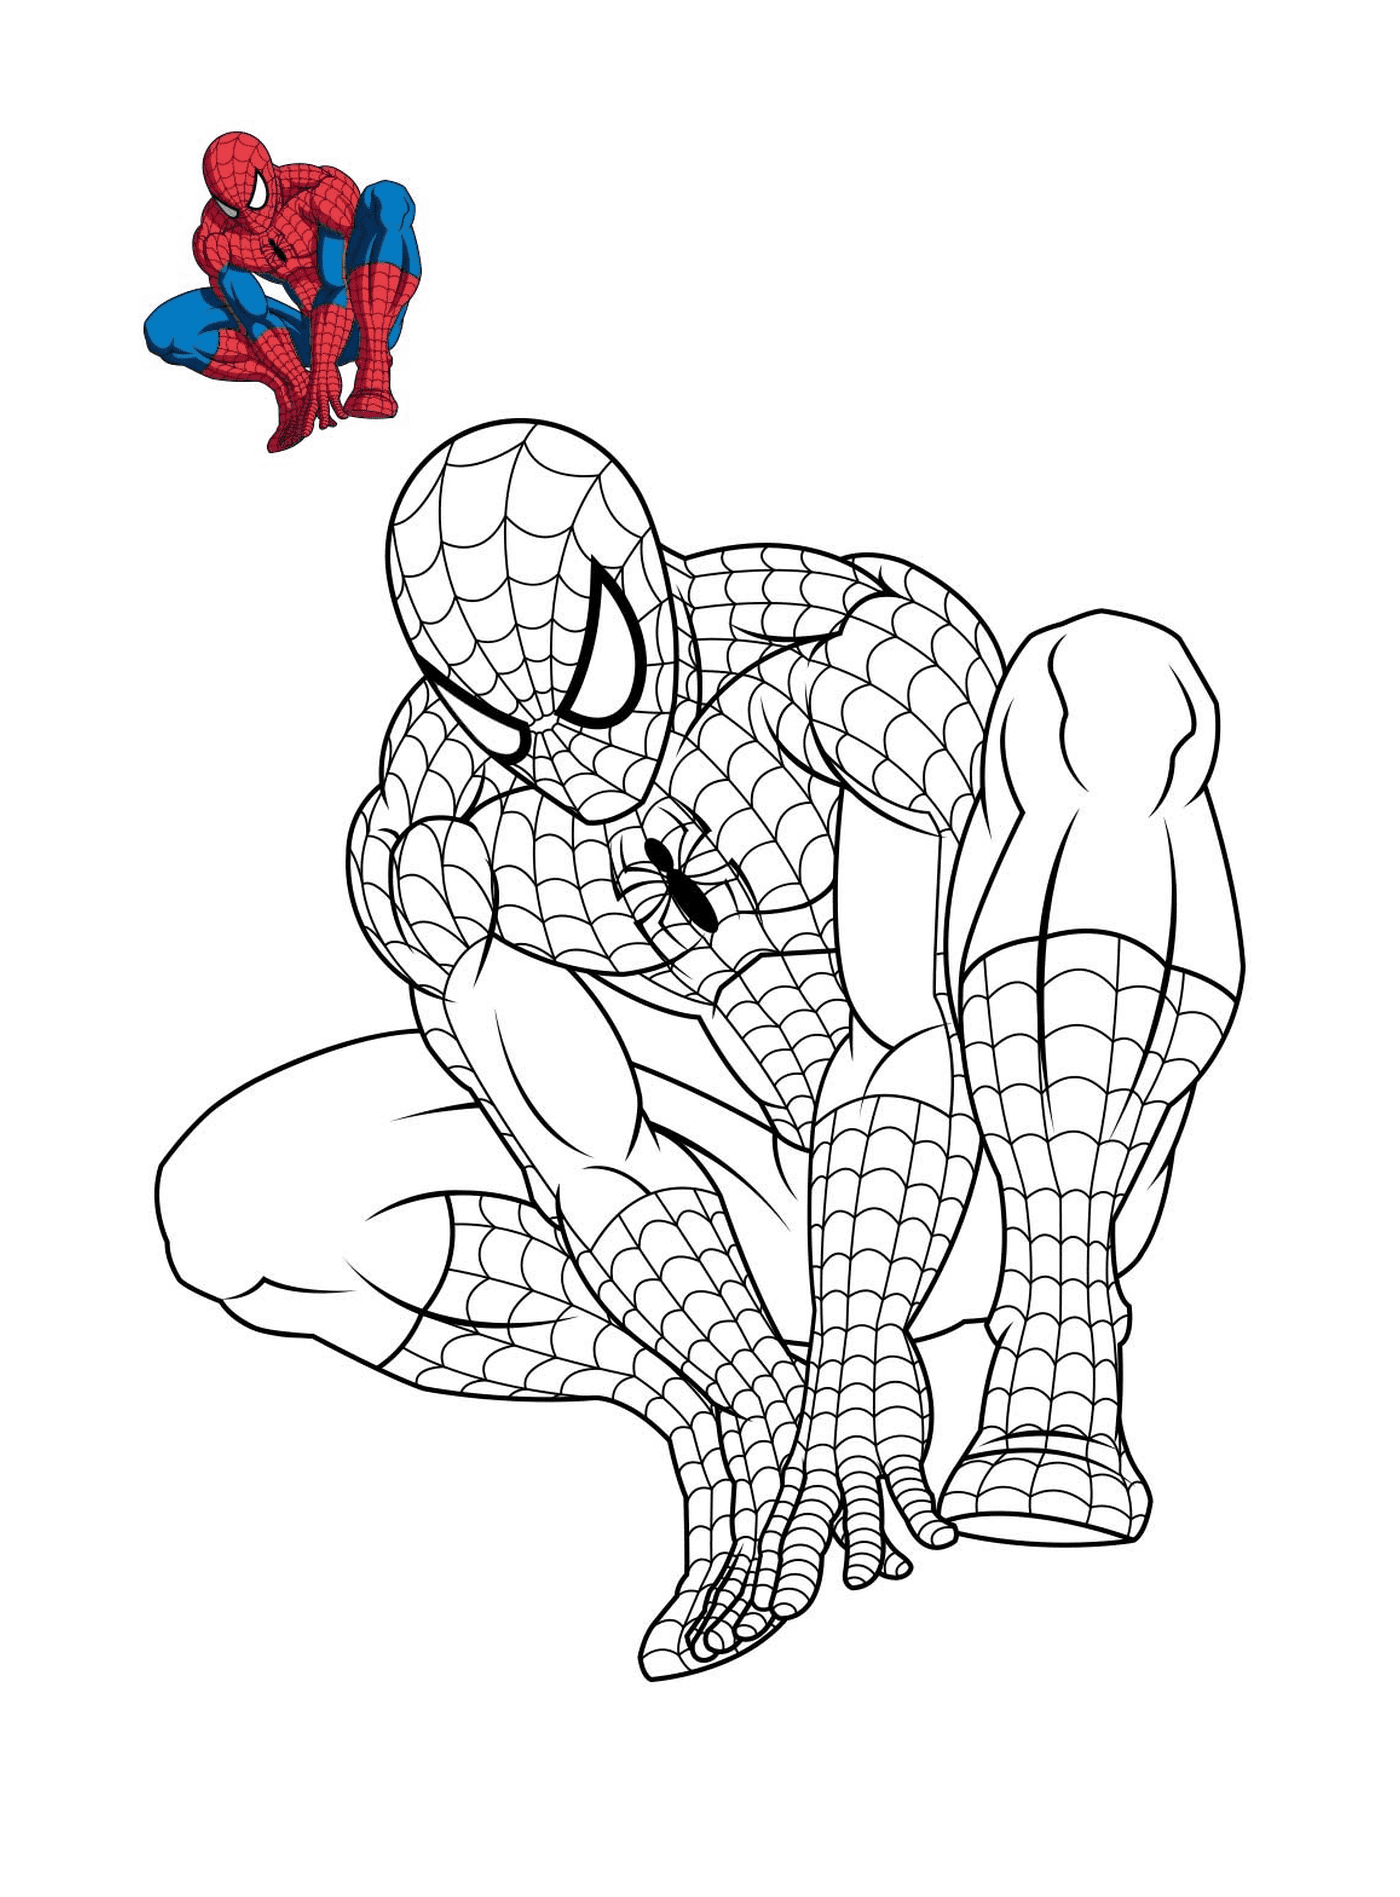  Spider-Man thinking about coloring 